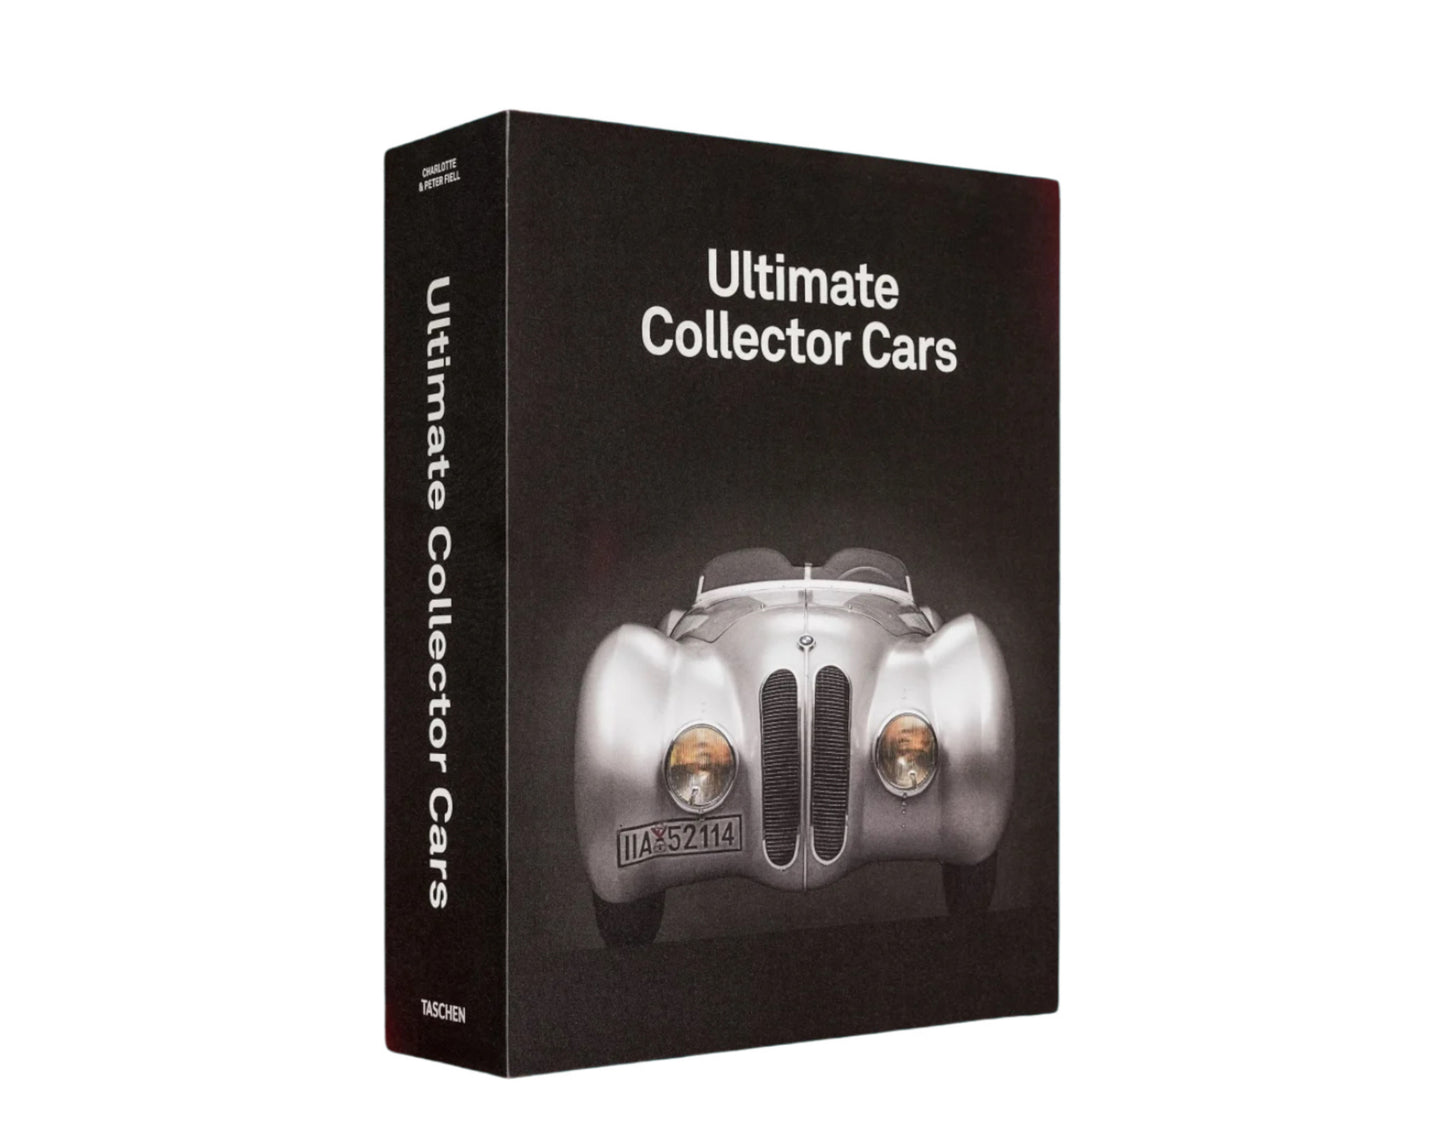 Taschen Books - Ultimate Collector Cars Hardcover Book - Two Vols. - XL